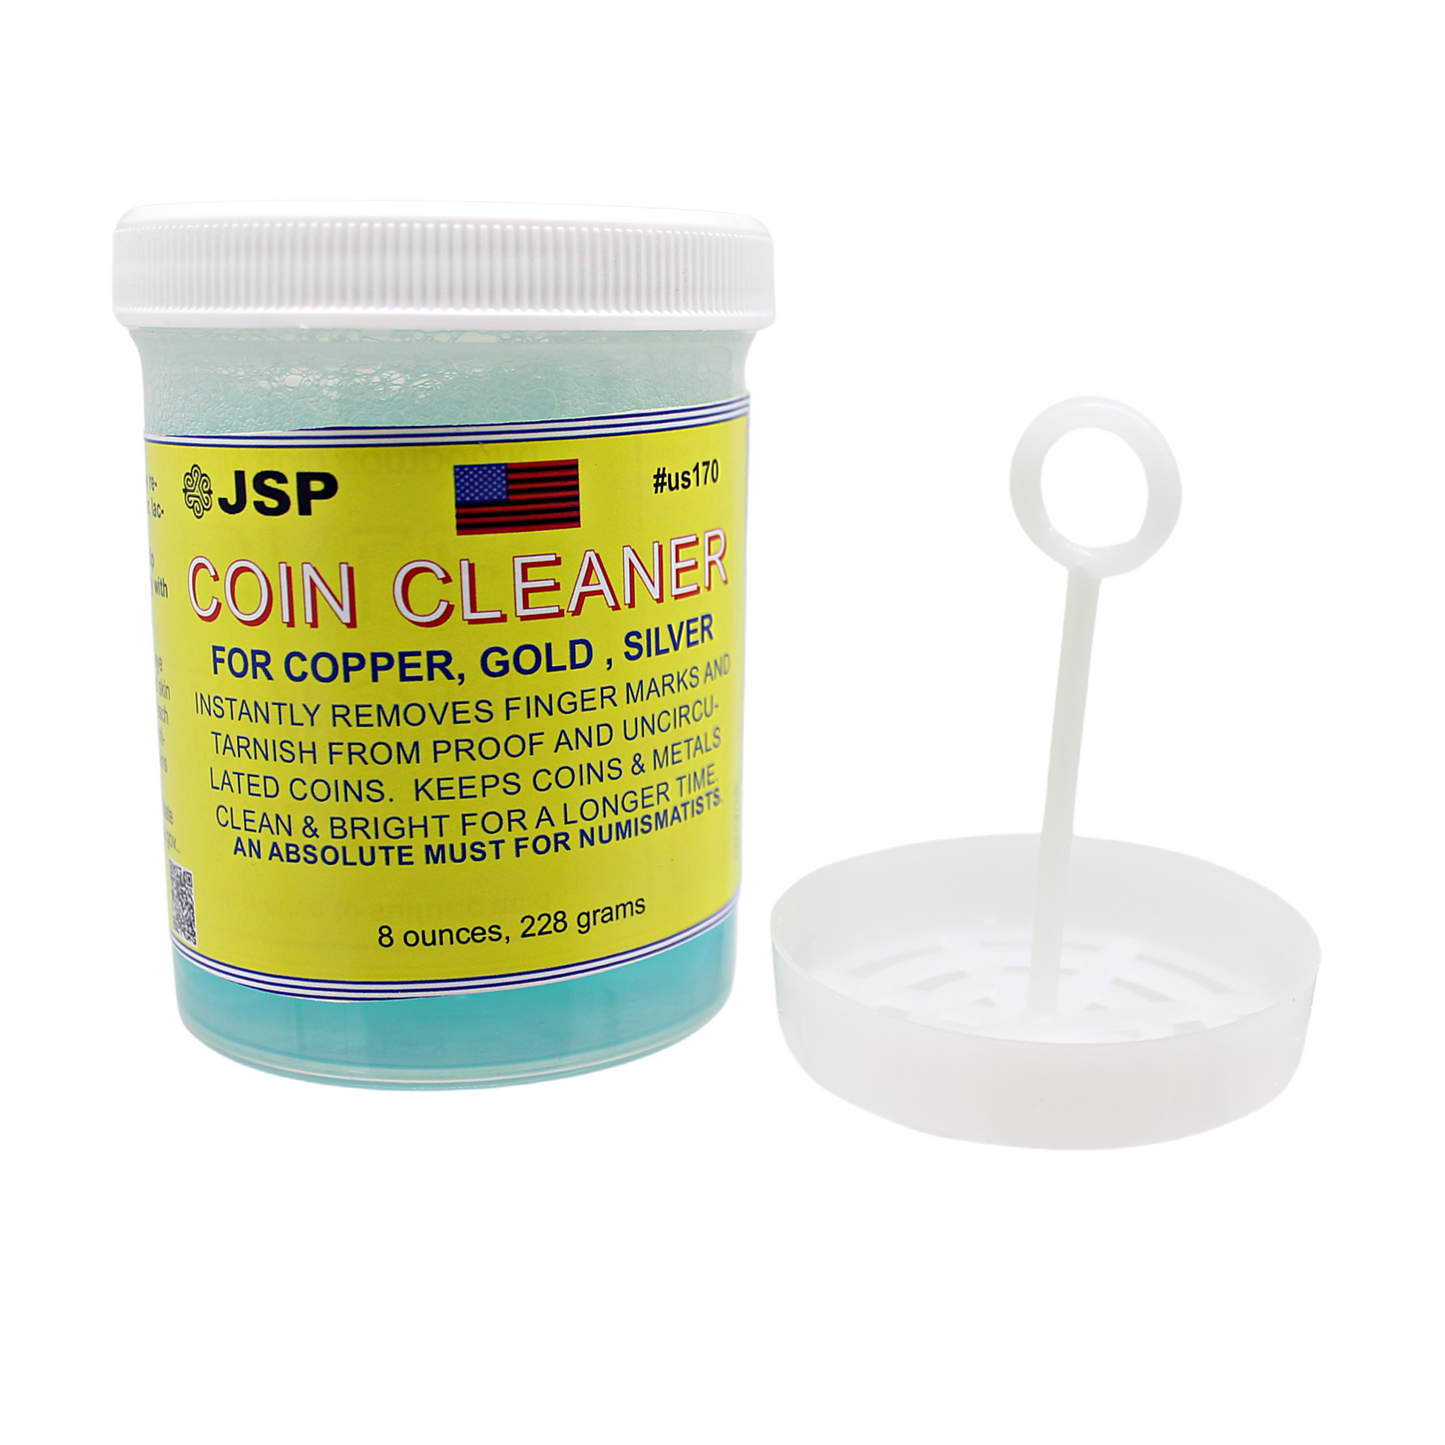 JSP Super Coin Cleaner 8 oz for Copper, Gold, Silver, & Platinum Precious Metals Jewelry Coins Bars